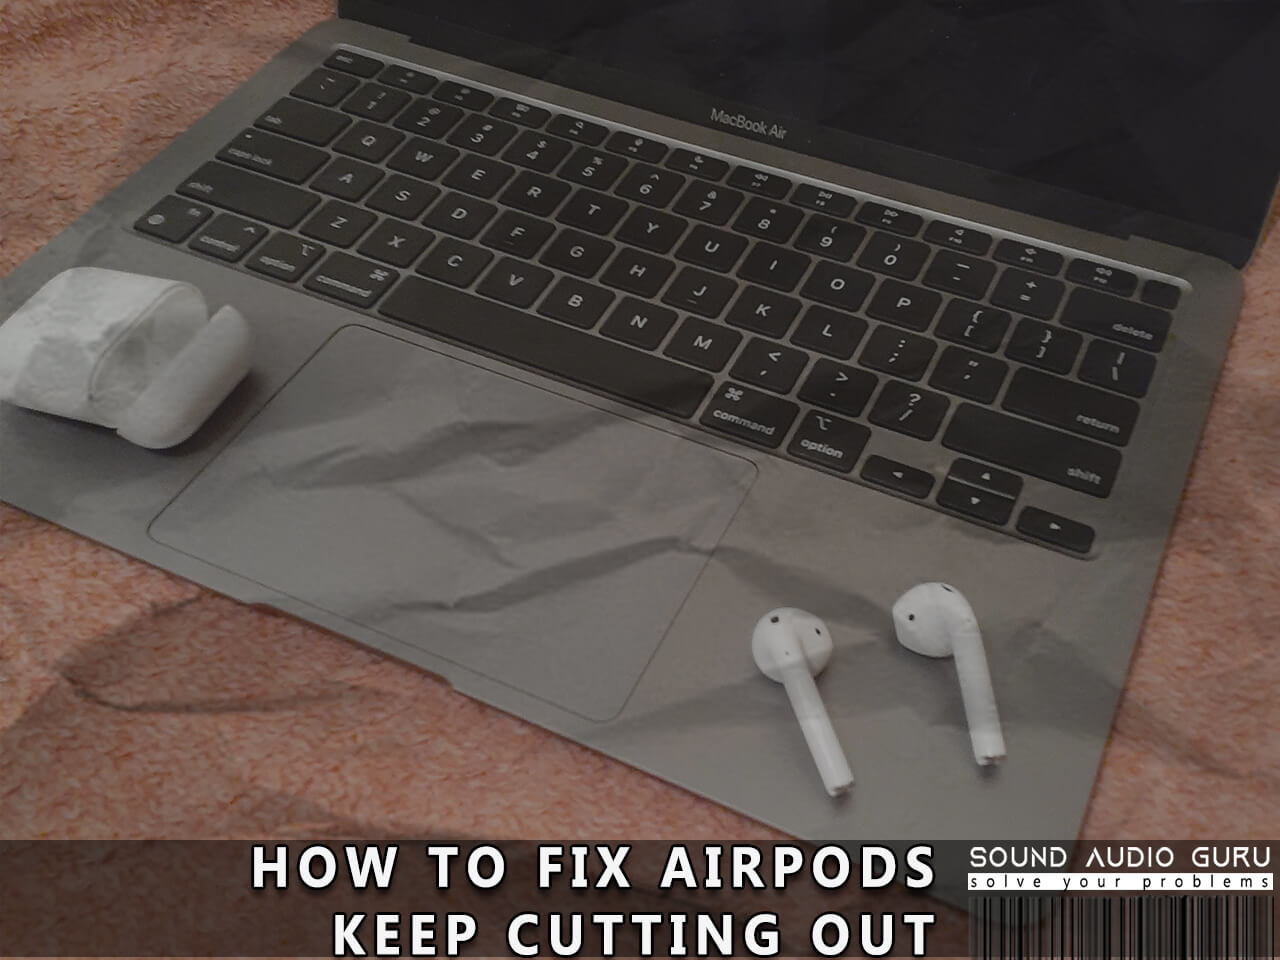 AirPods keep cutting out